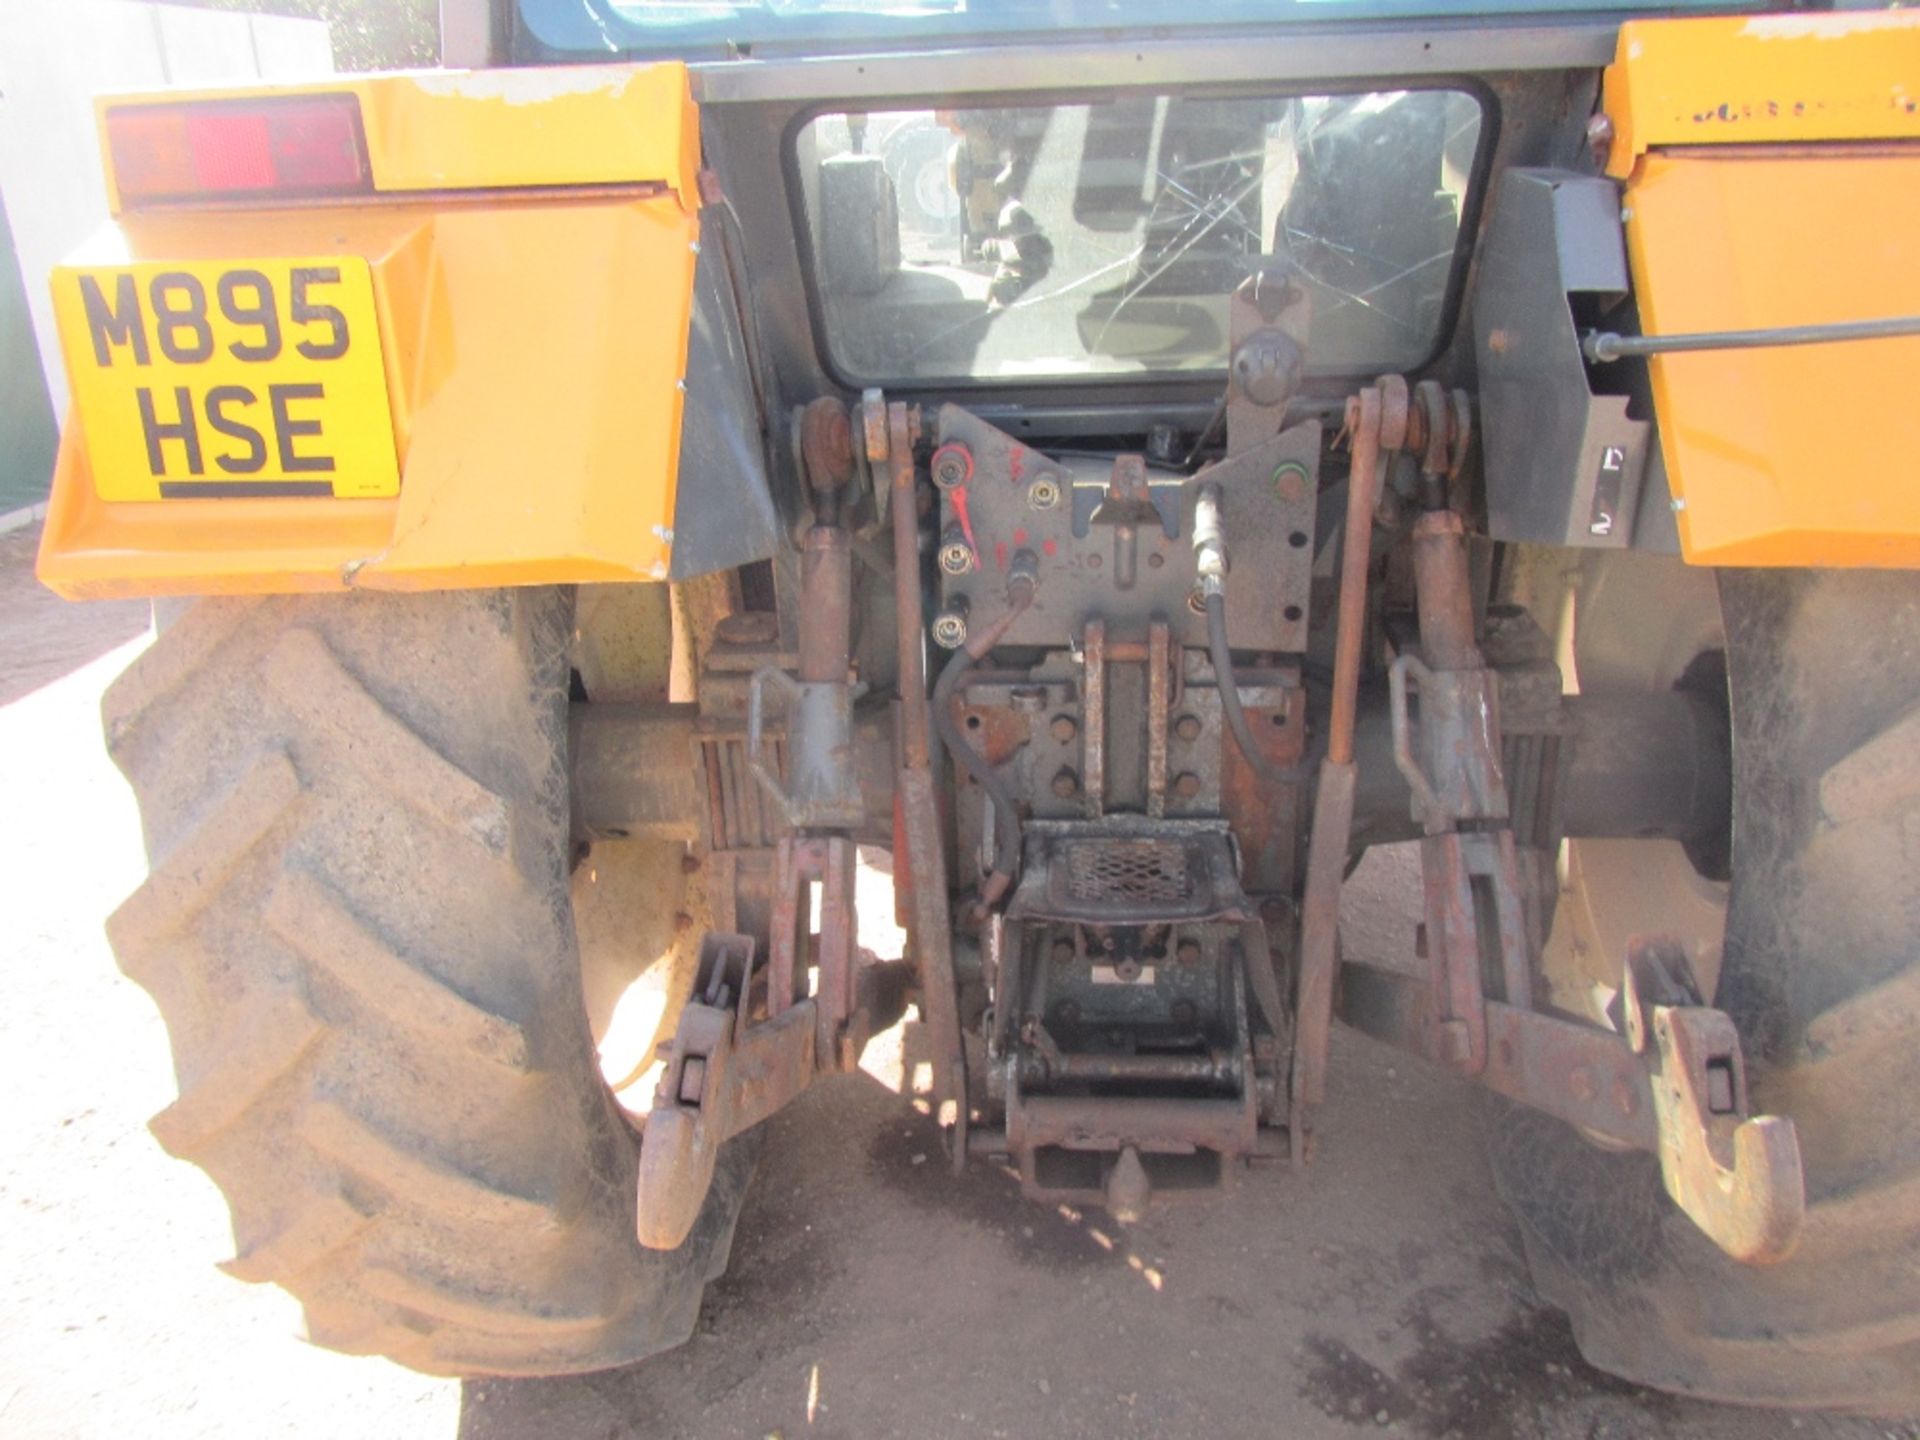 Renault 106-54 TL Tractor c/w front linkage, 40k transmission Reg. No. M895 HSE - Image 8 of 16